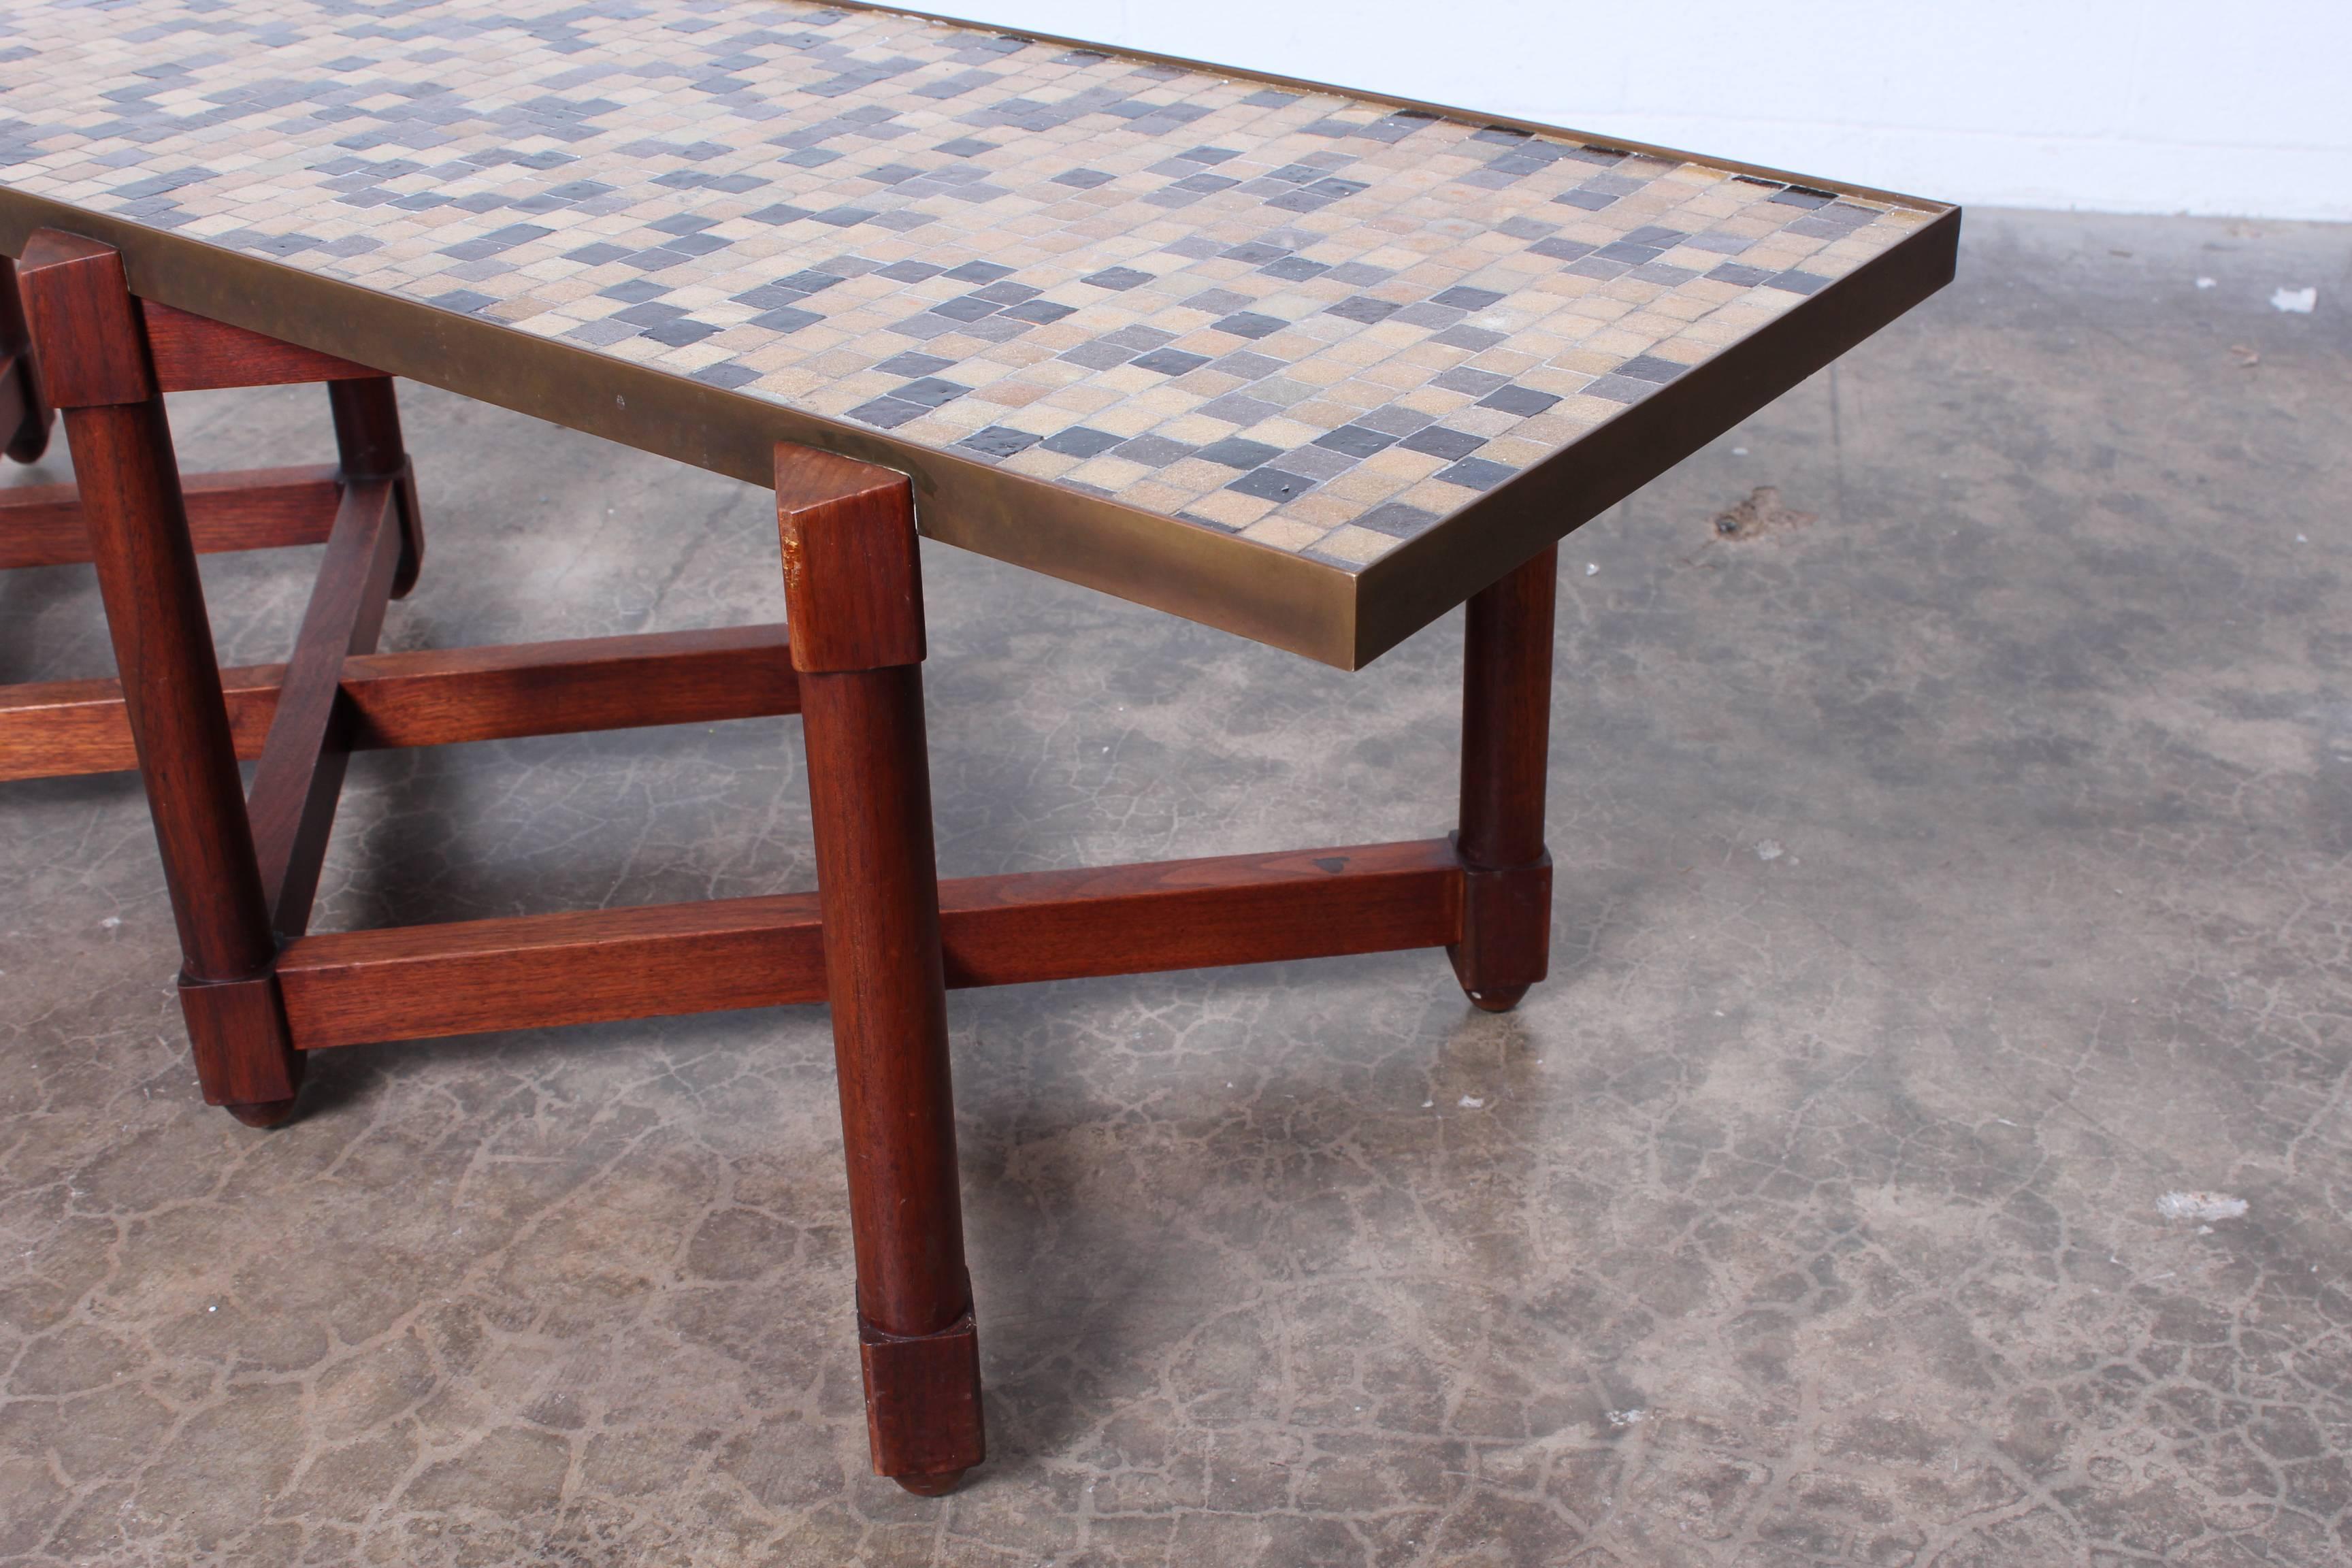 A larger variation of this rare table with Murano glass tiles. Designed by Edward Wormley for Dunbar.